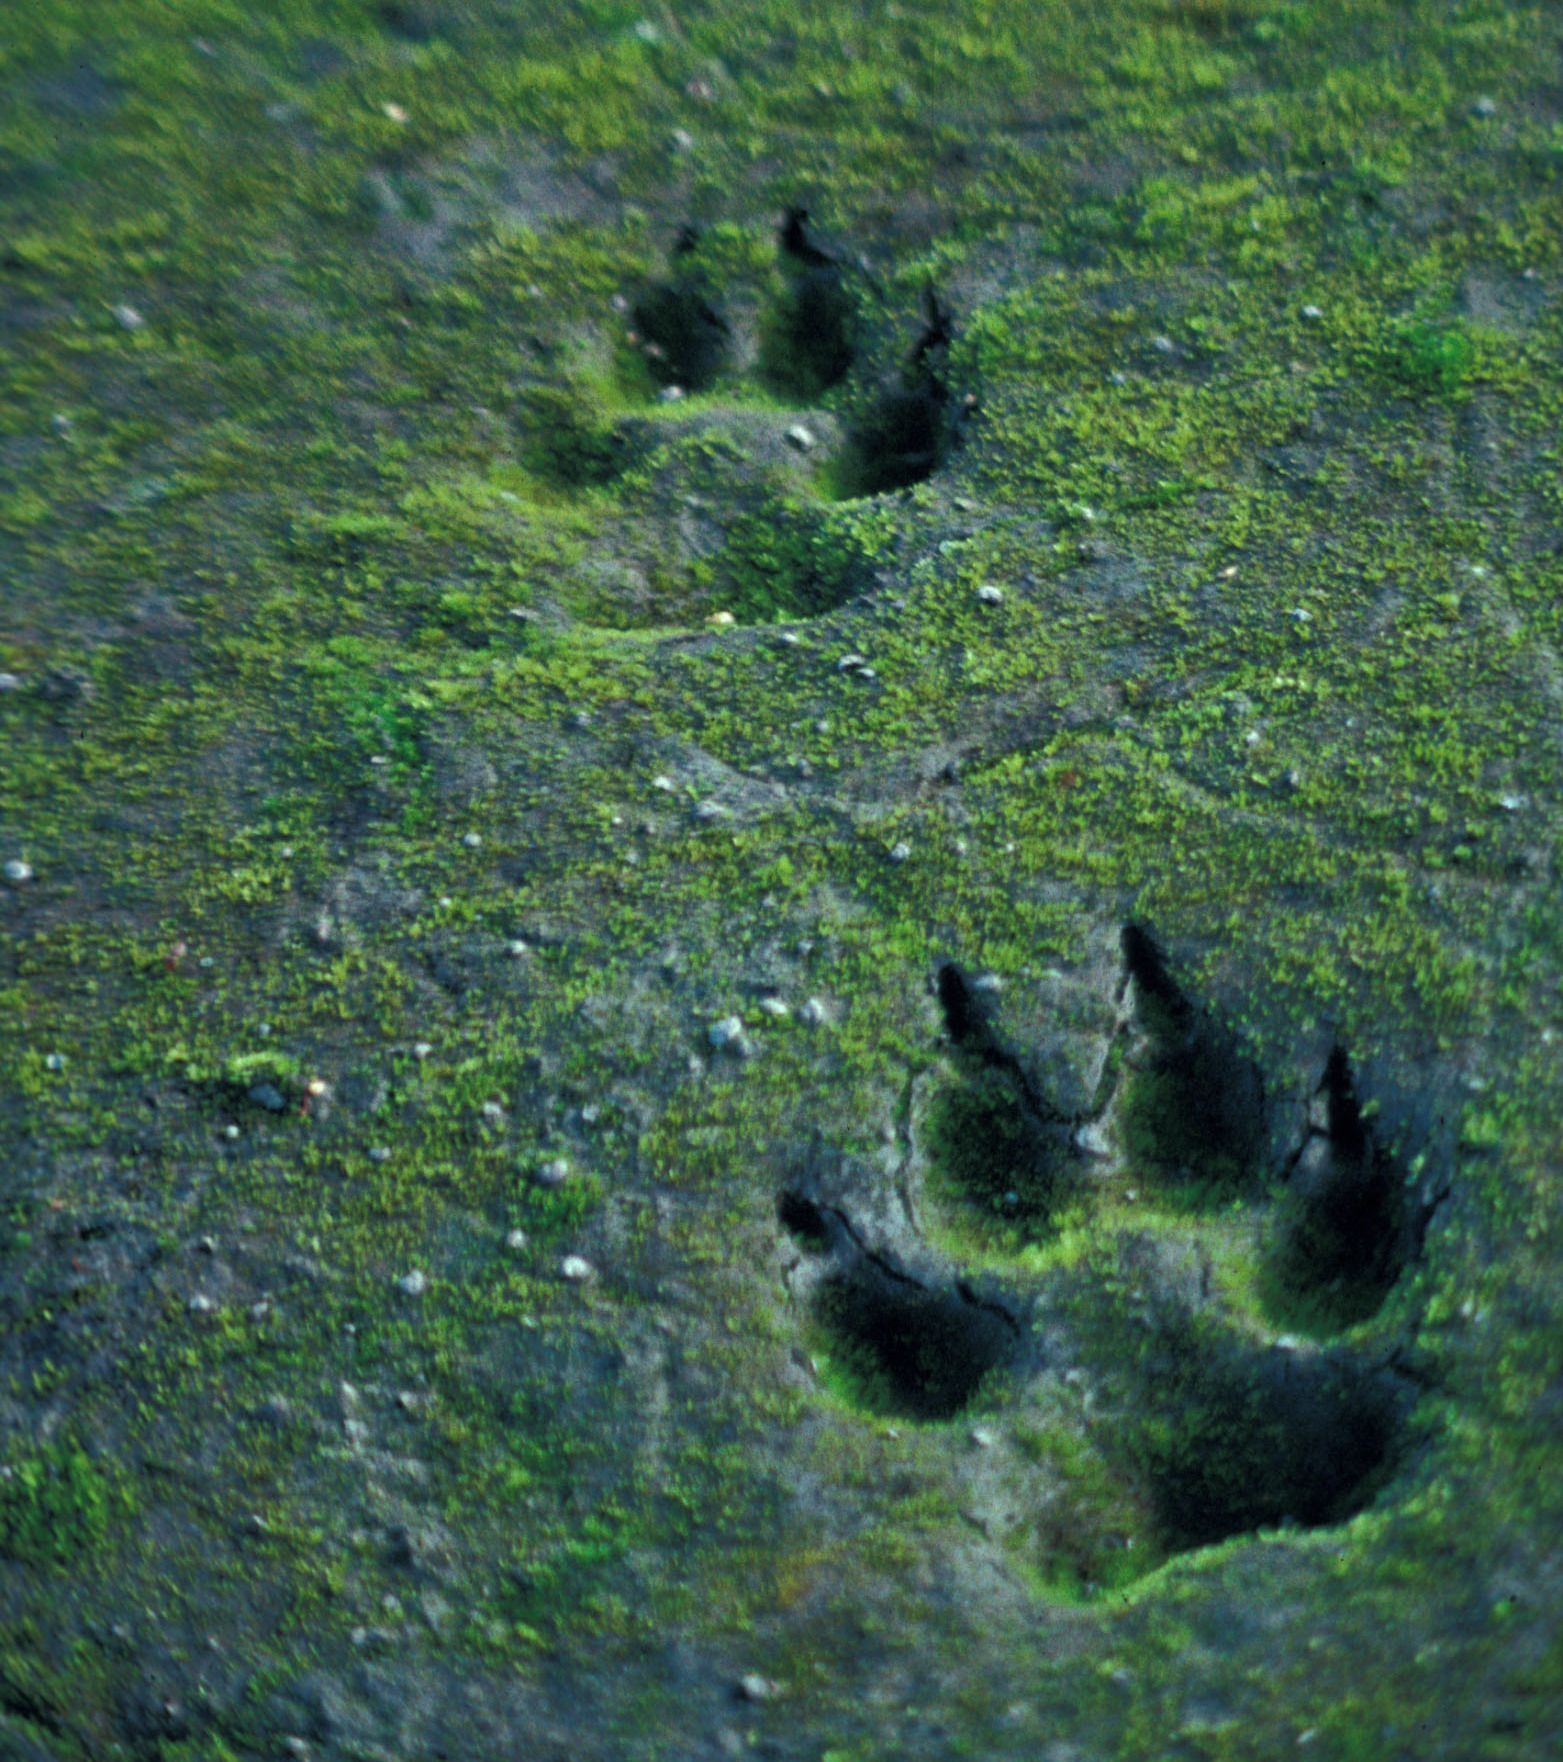 Close-up shot of two wolf tracks in some mossy mud.